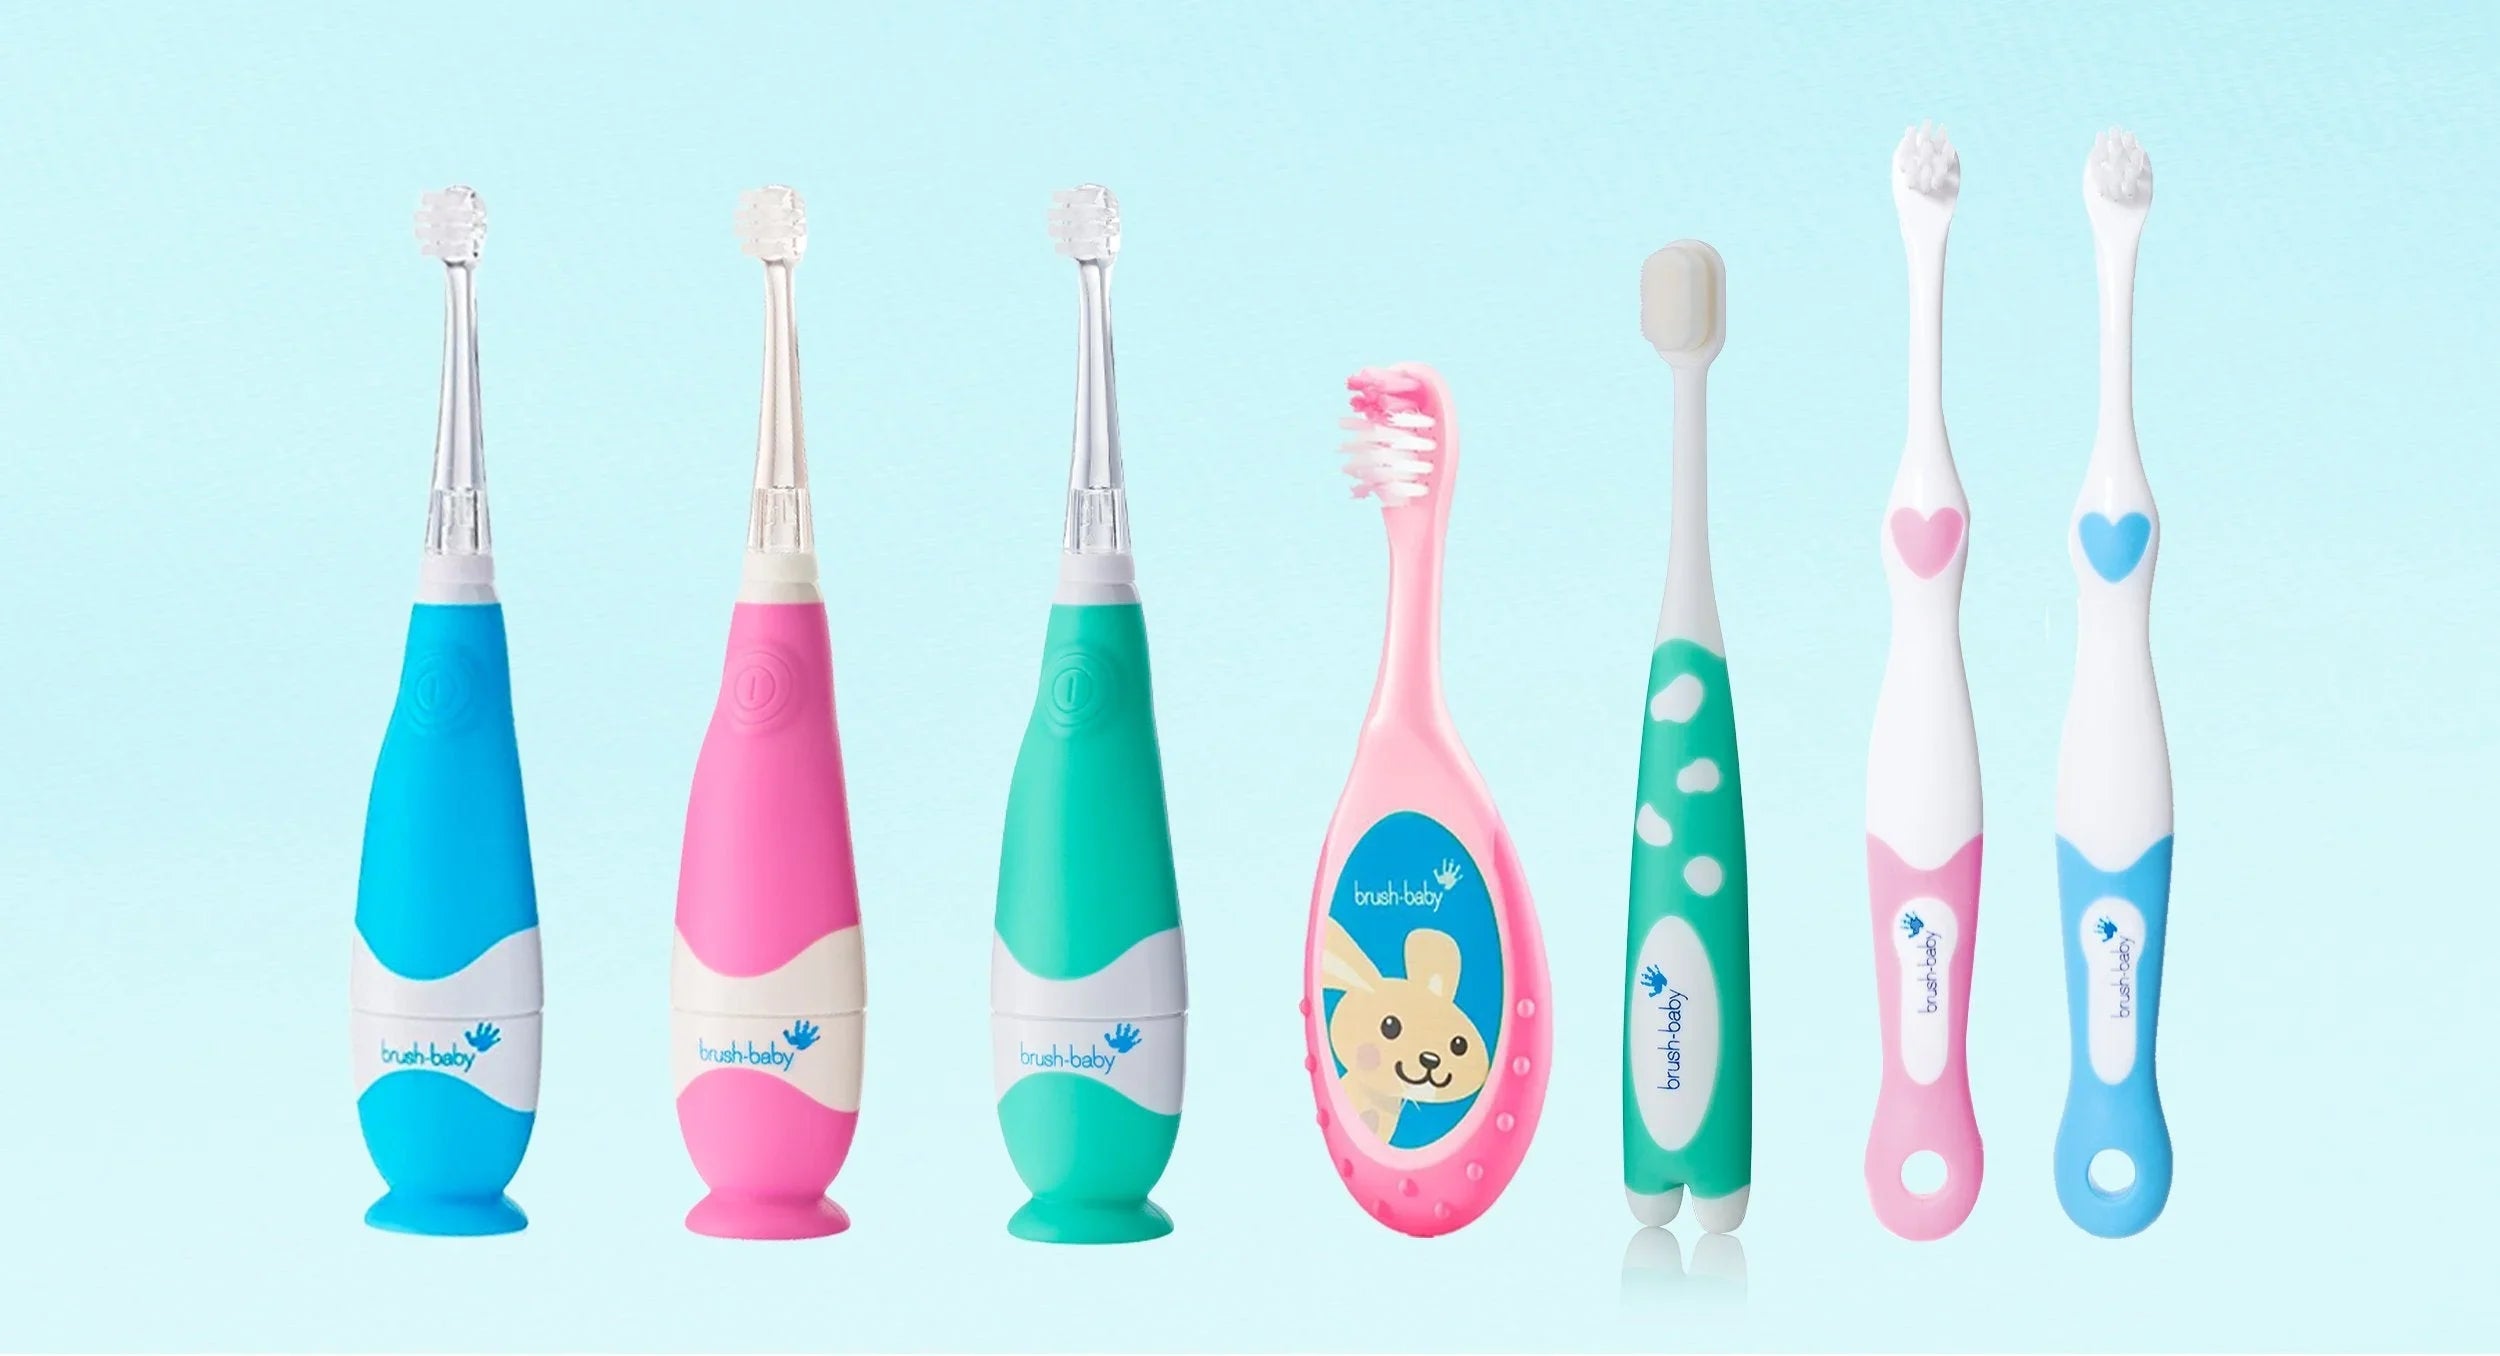 brush baby best electric toddler toothbrush | extra soft bristle toothbrush for babies milk teeth